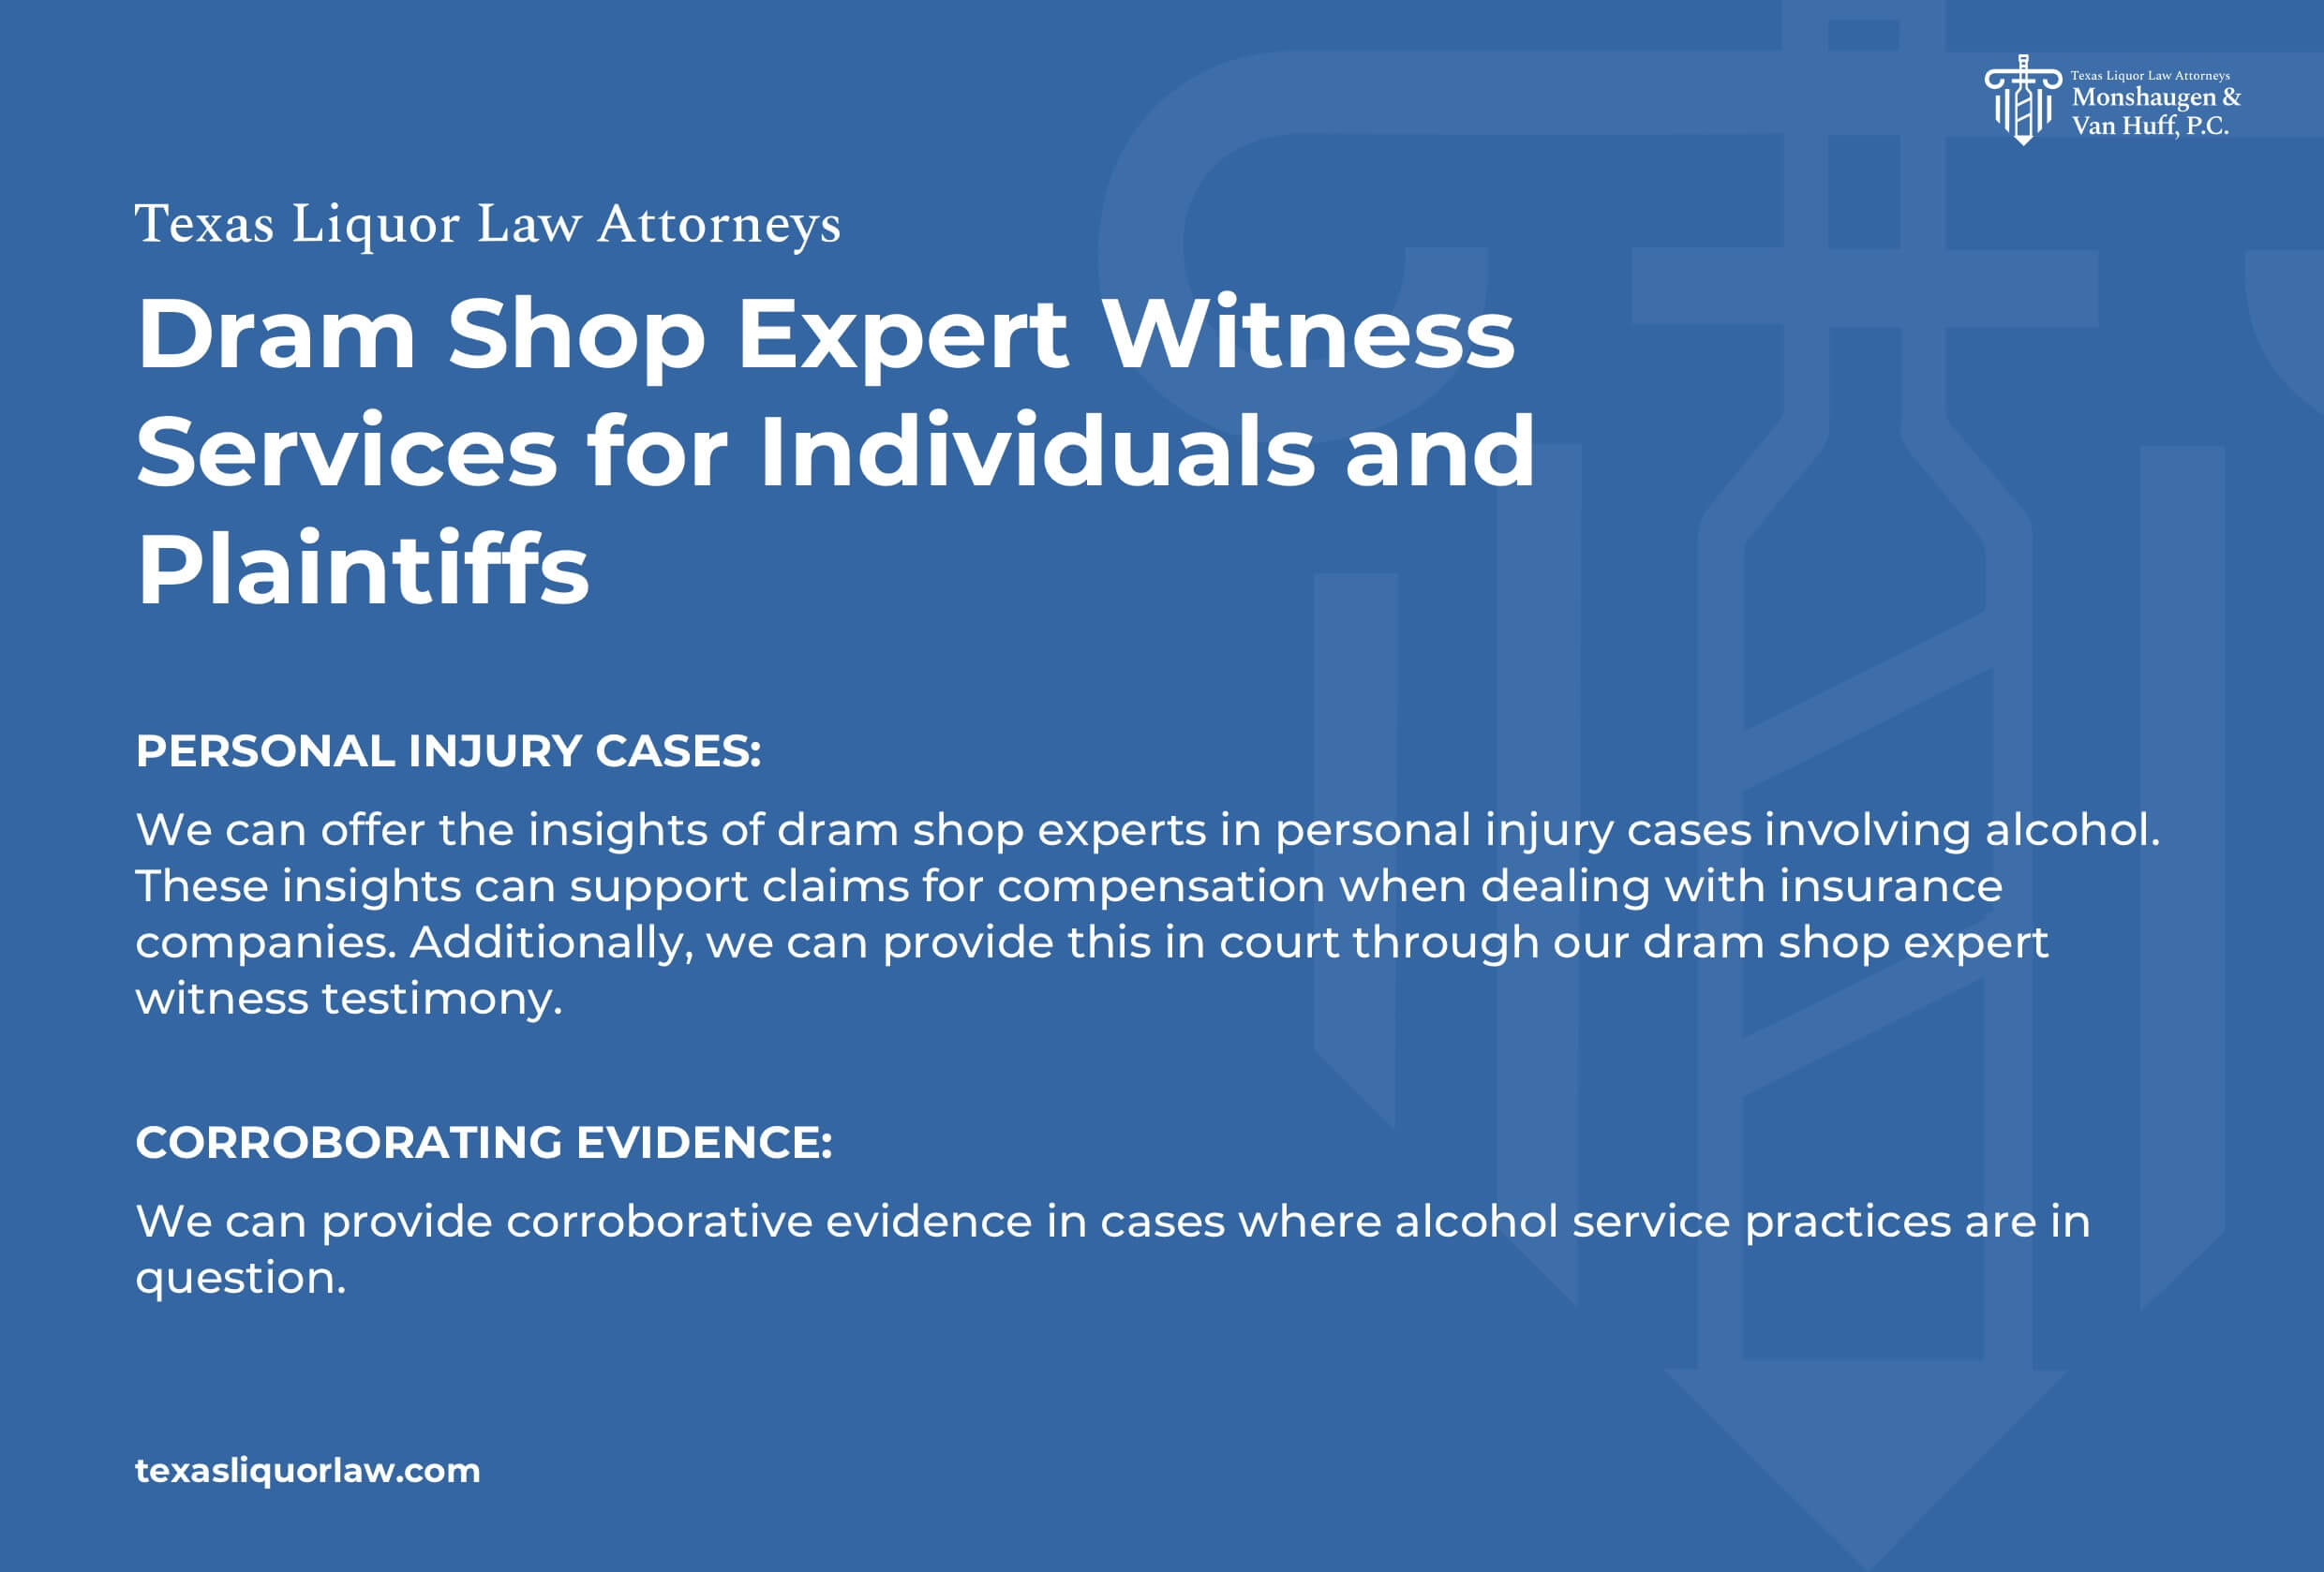 Dram Shop Expert Witness Services For Individuals and Plaintiffs